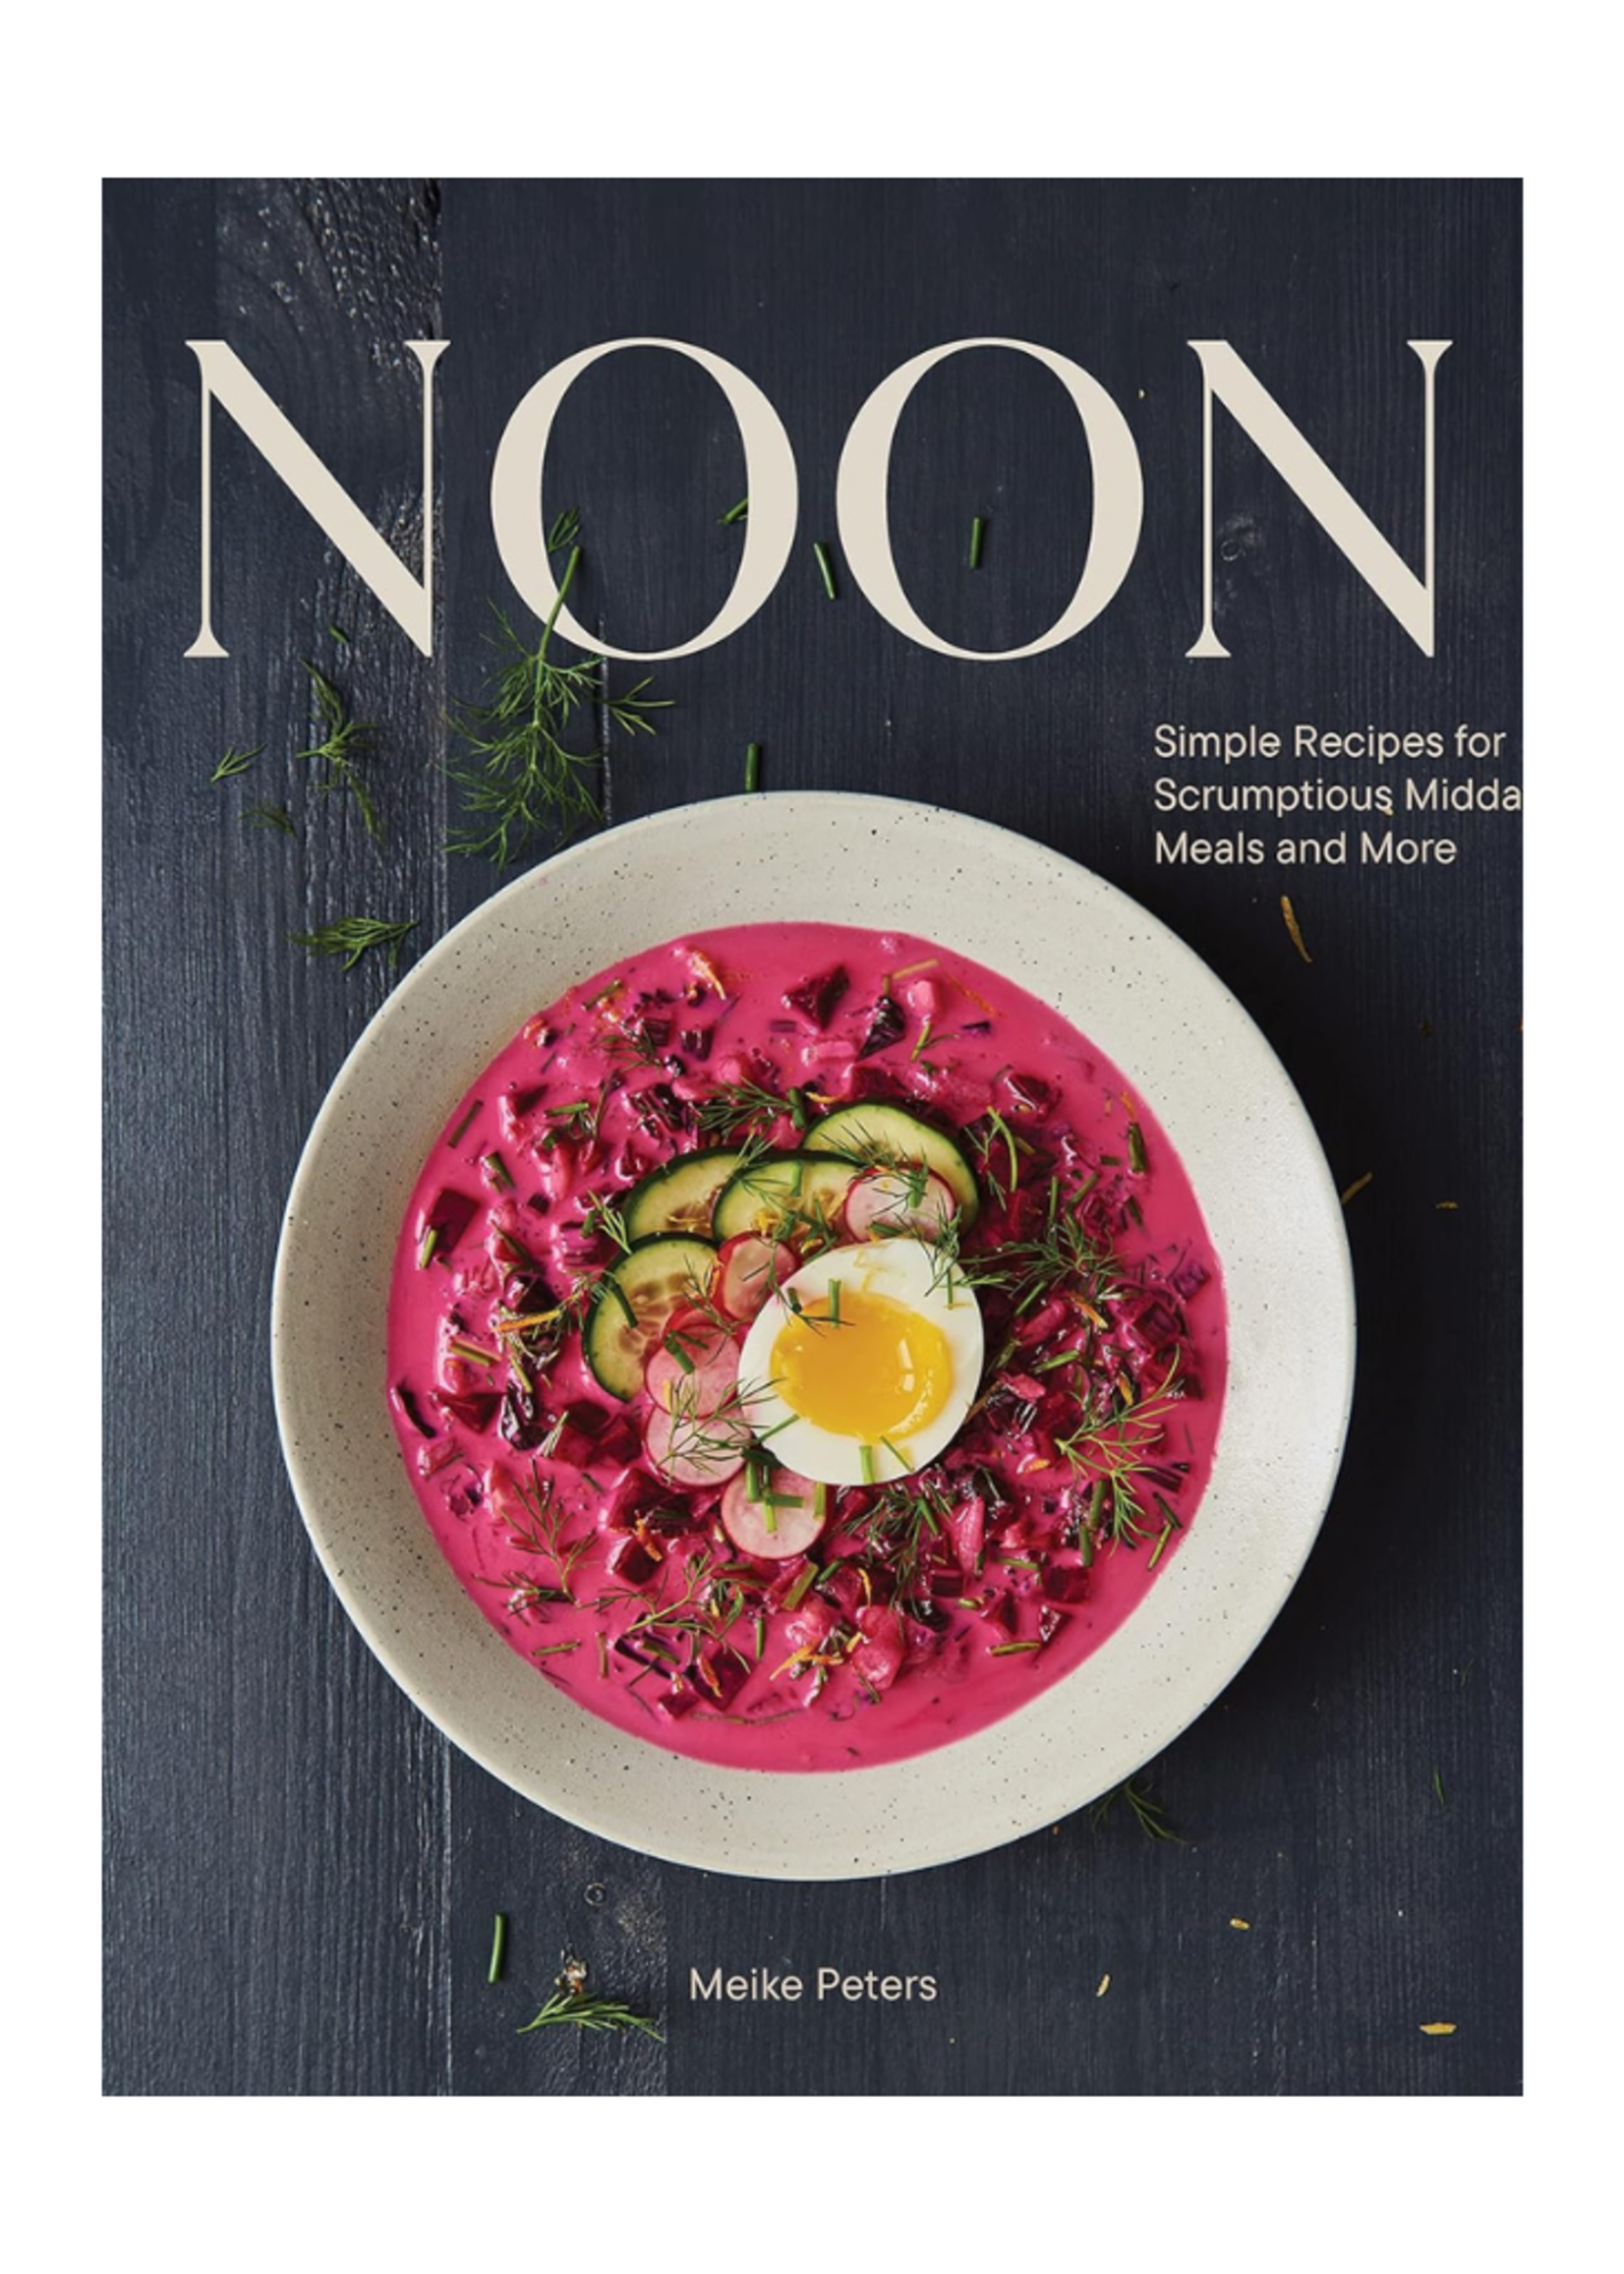 Chronicle Books Noon: Simple Recipes for Scrumptious Midday Meals and More by  Meike Peters